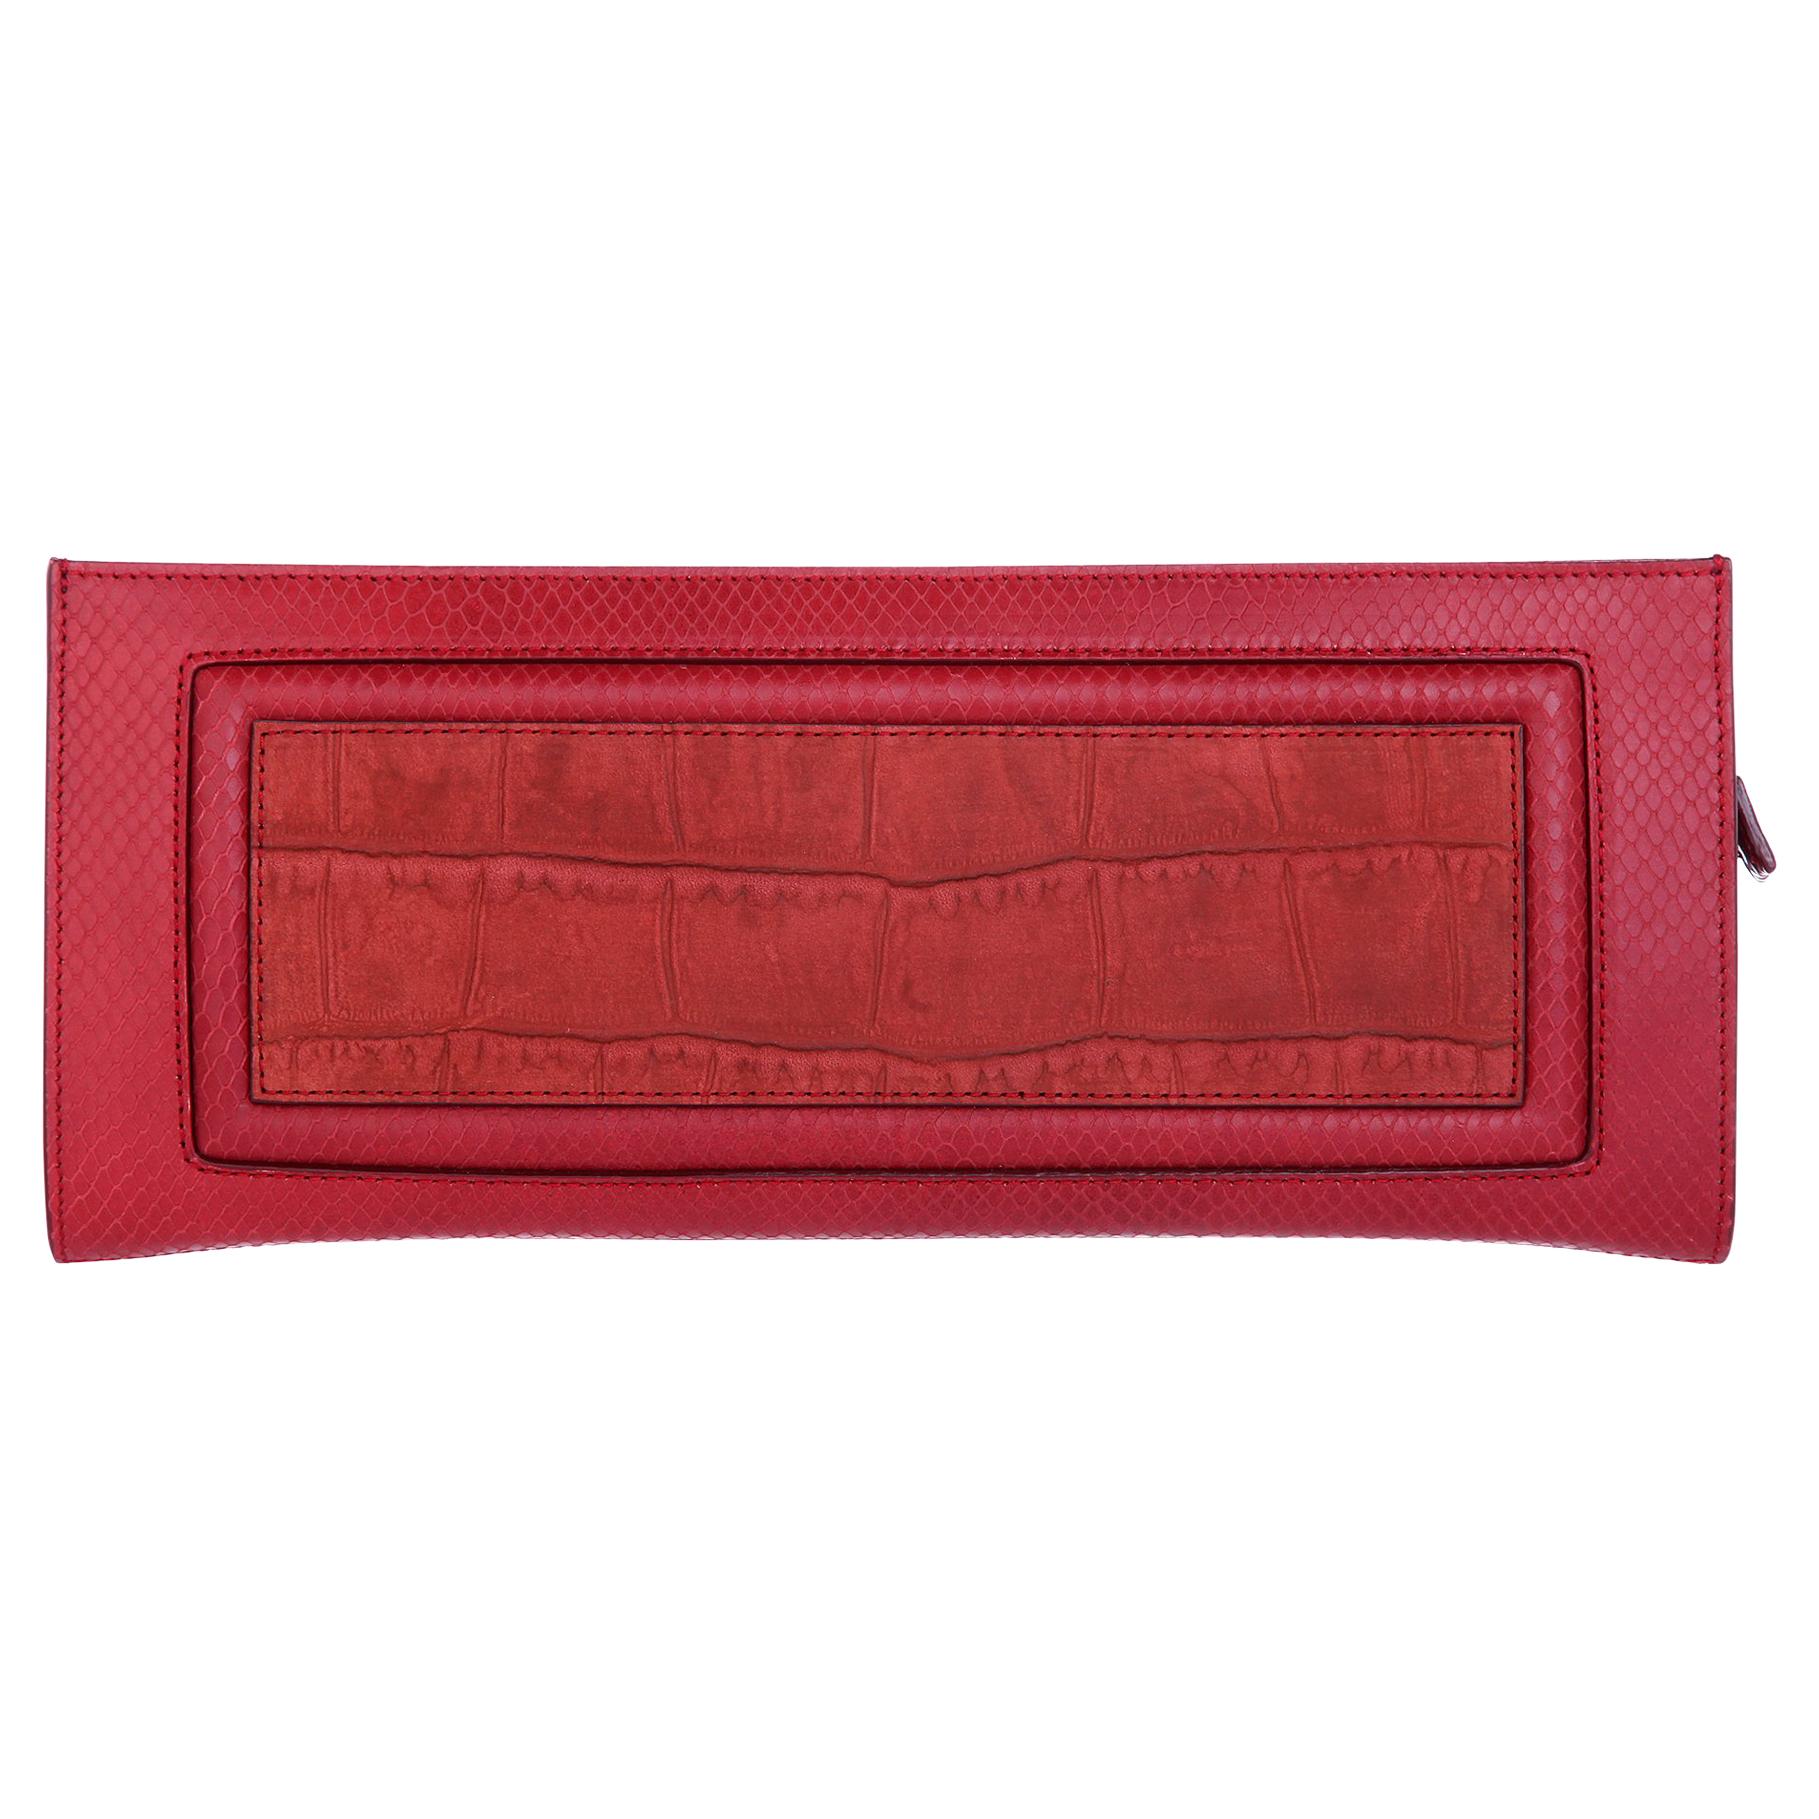 Escada Python embossed leather Clutch ESCA-06 For Sale